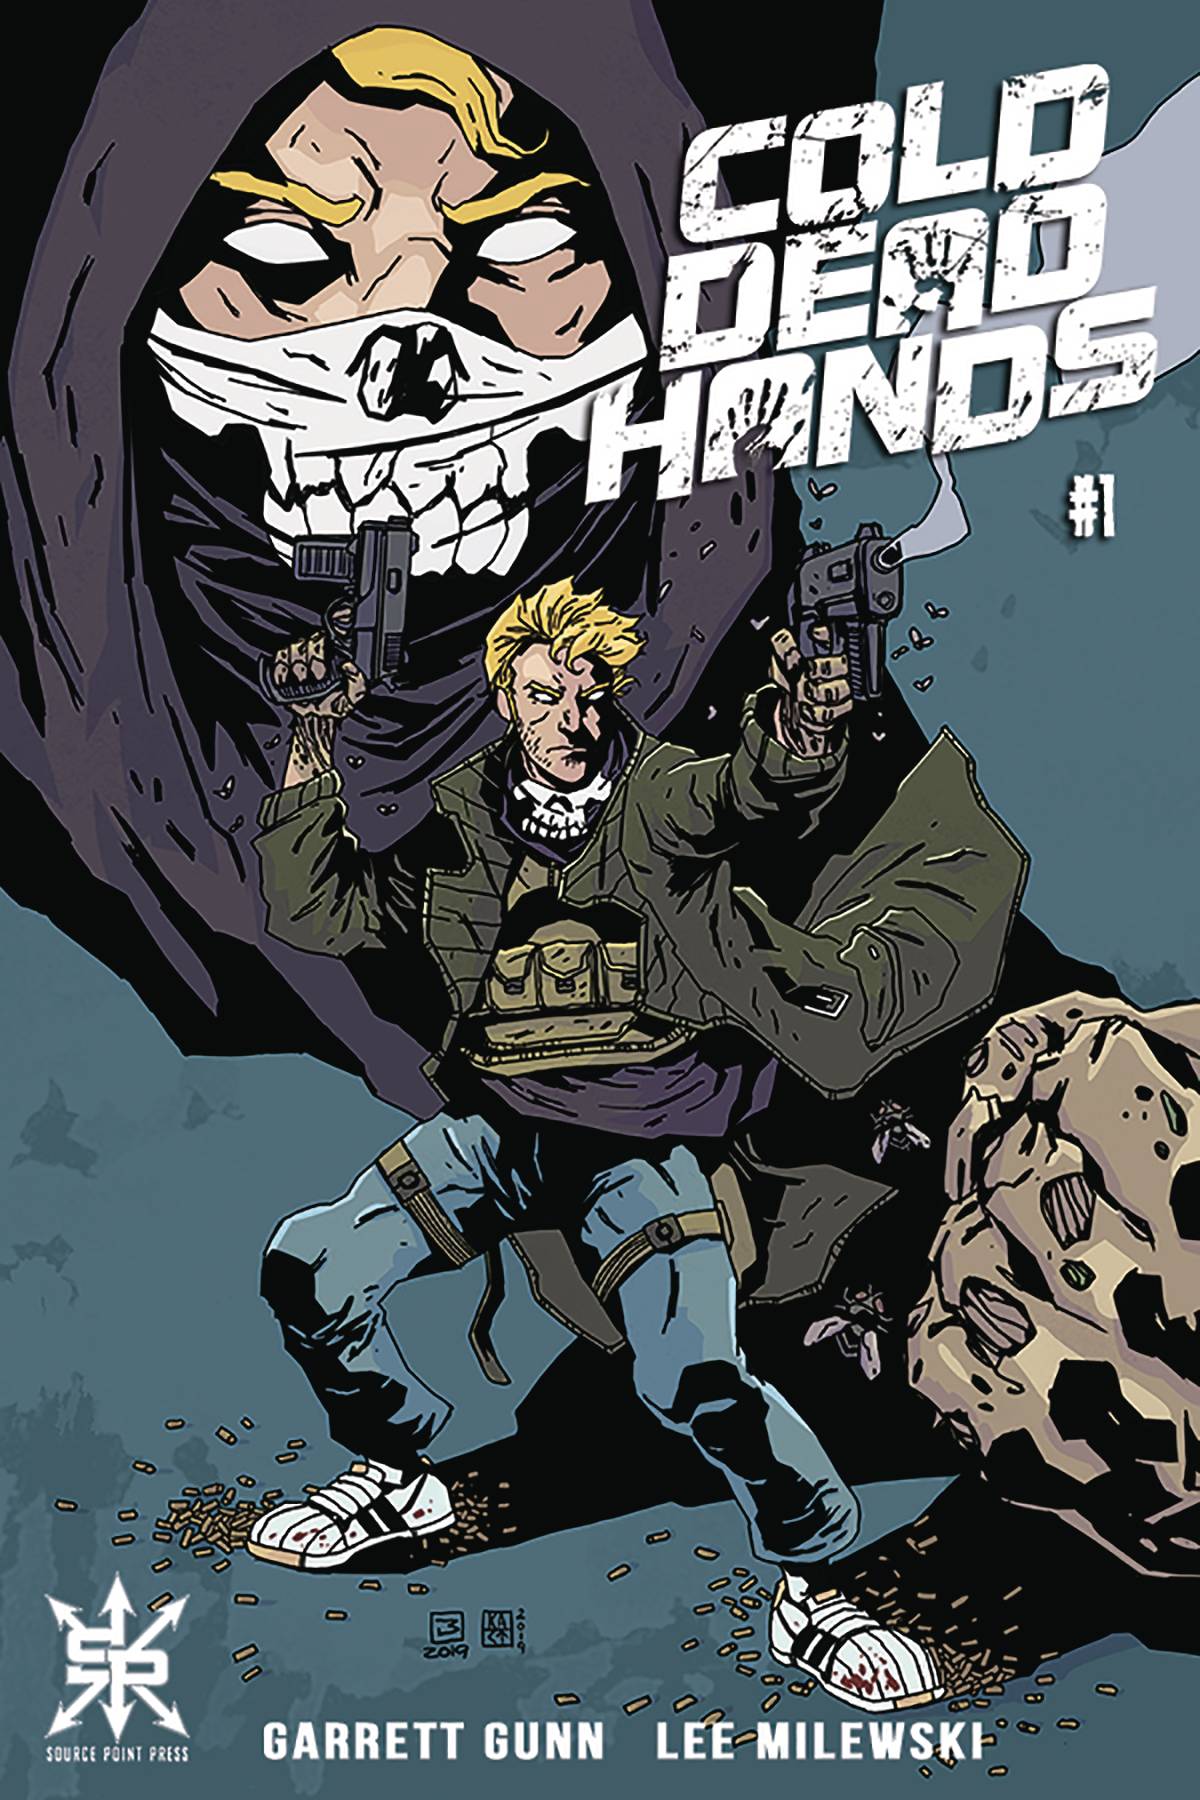 Photo of Cold Dead Hands Issue 1 (of 3) comic sold by Stronghold Collectibles